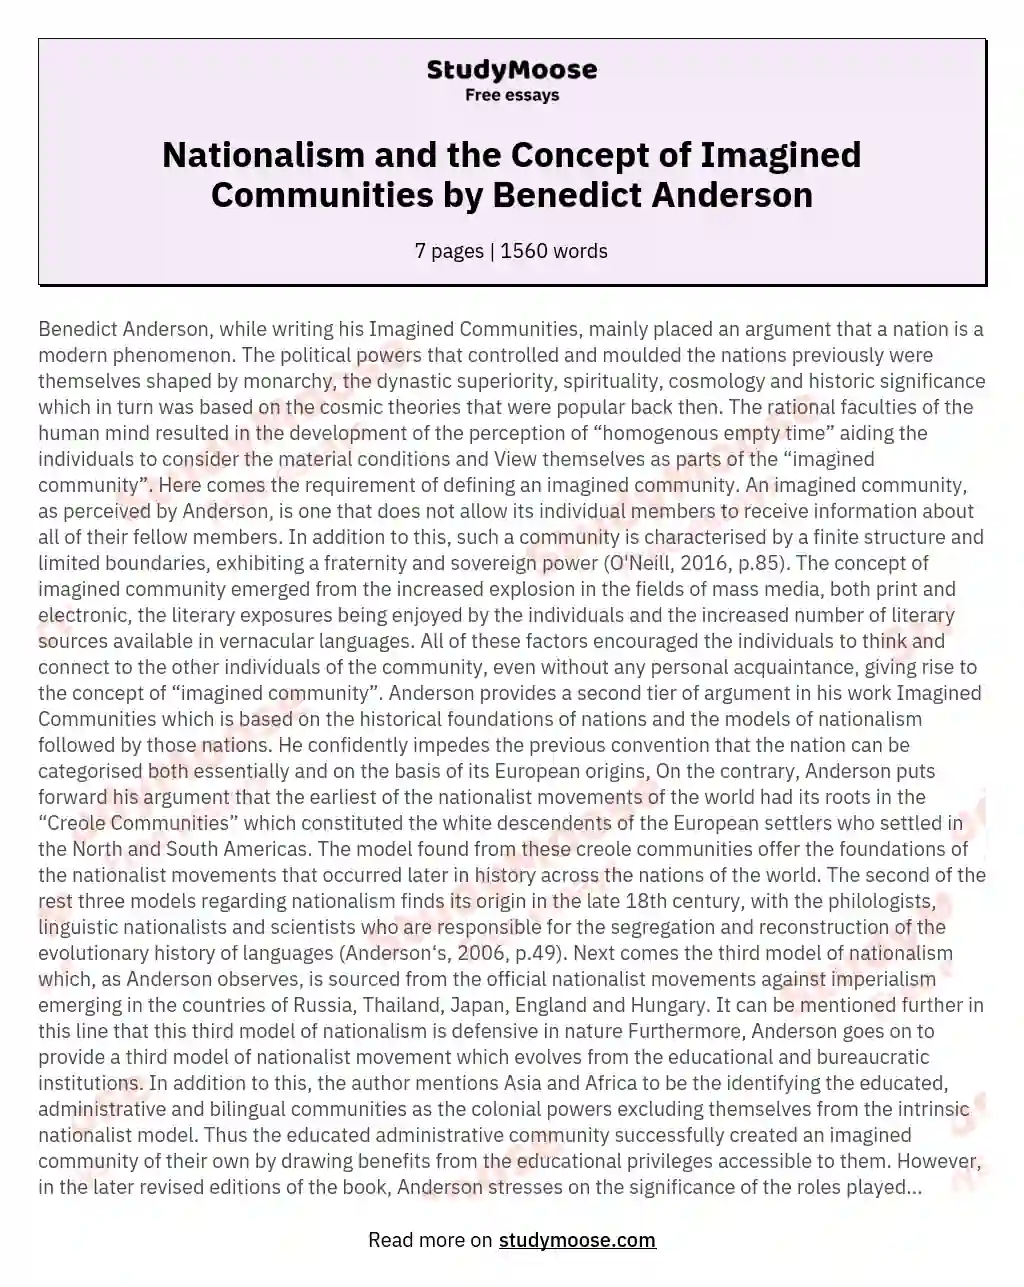 Nationalism and the Concept of Imagined Communities by Benedict Anderson essay